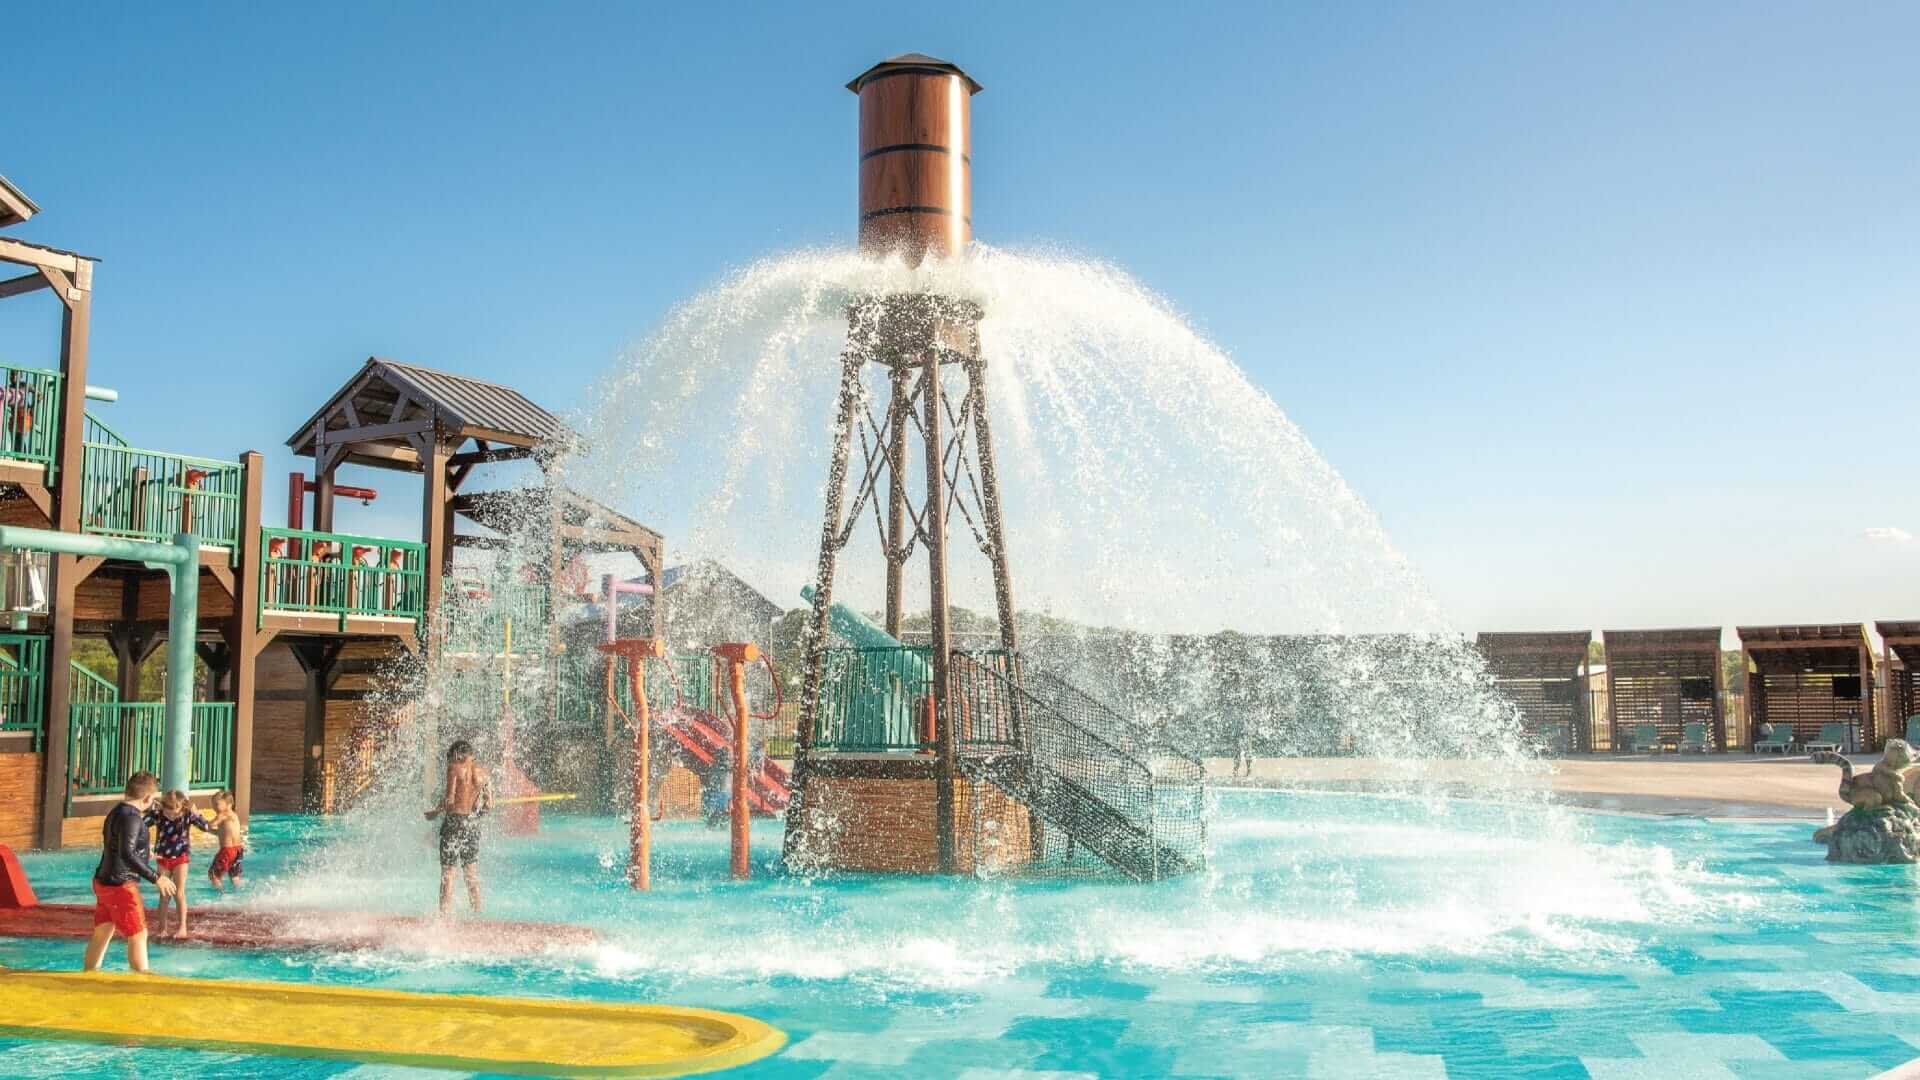 The Power Plunge water feature by Interactive Play releases up to 750 gallons of water in a beautiful 360-degree spray pattern over the pool deck floor at the Camp Fimfo RV Resort in Waco Texas.